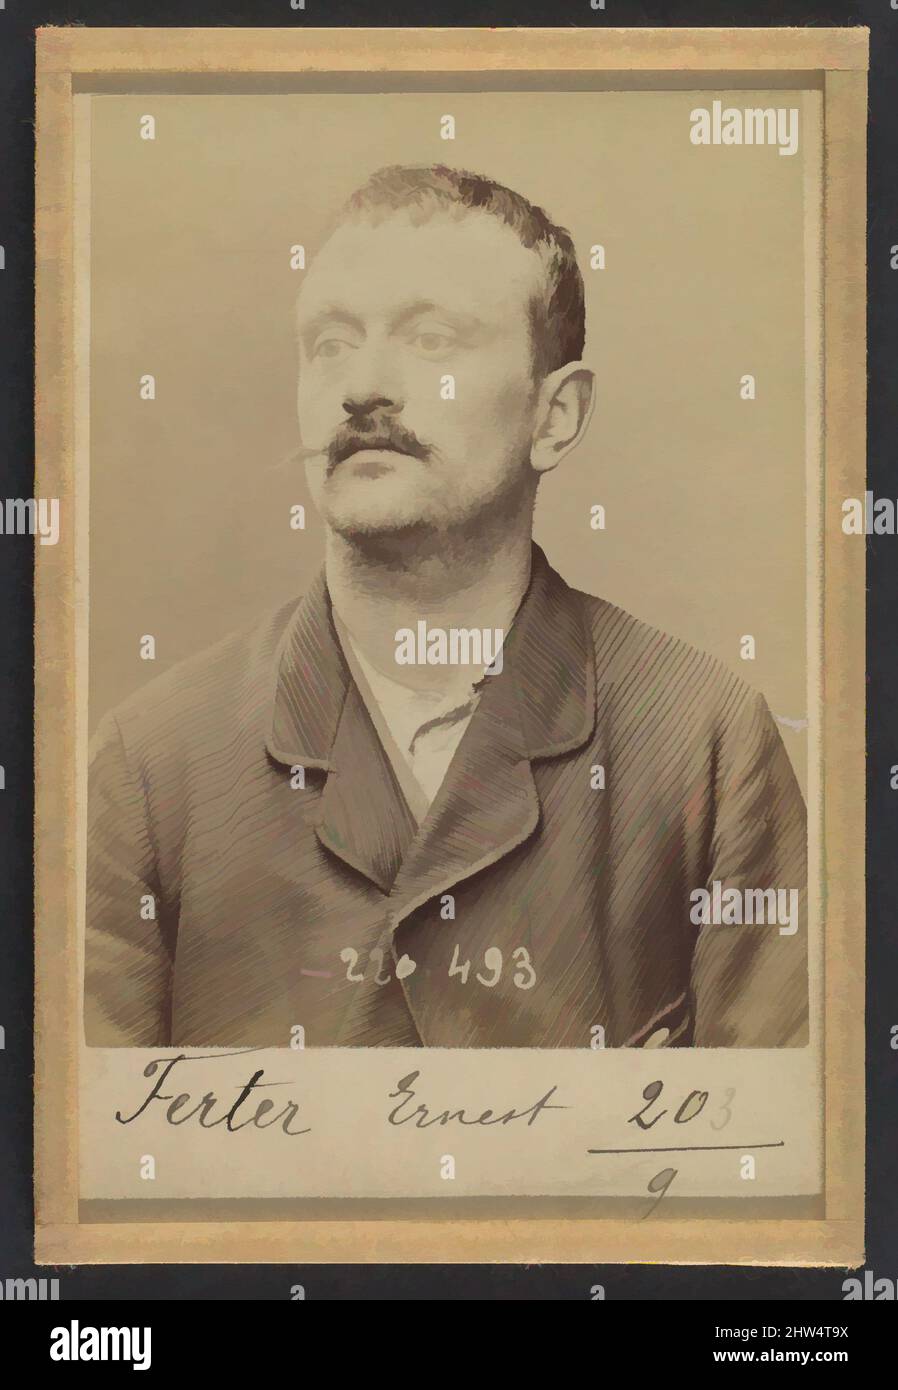 Art inspired by Ferter. Ernest, Charles. 31 ans, né le 23/10/62 à Melun (Seine & Marne). Fumiste. Anarchiste. 2/7/94., 1894, Albumen silver print from glass negative, 10.5 x 7 x 0.5 cm (4 1/8 x 2 3/4 x 3/16 in.) each, Photographs, Alphonse Bertillon (French, 1853–1914), Born into a, Classic works modernized by Artotop with a splash of modernity. Shapes, color and value, eye-catching visual impact on art. Emotions through freedom of artworks in a contemporary way. A timeless message pursuing a wildly creative new direction. Artists turning to the digital medium and creating the Artotop NFT Stock Photo